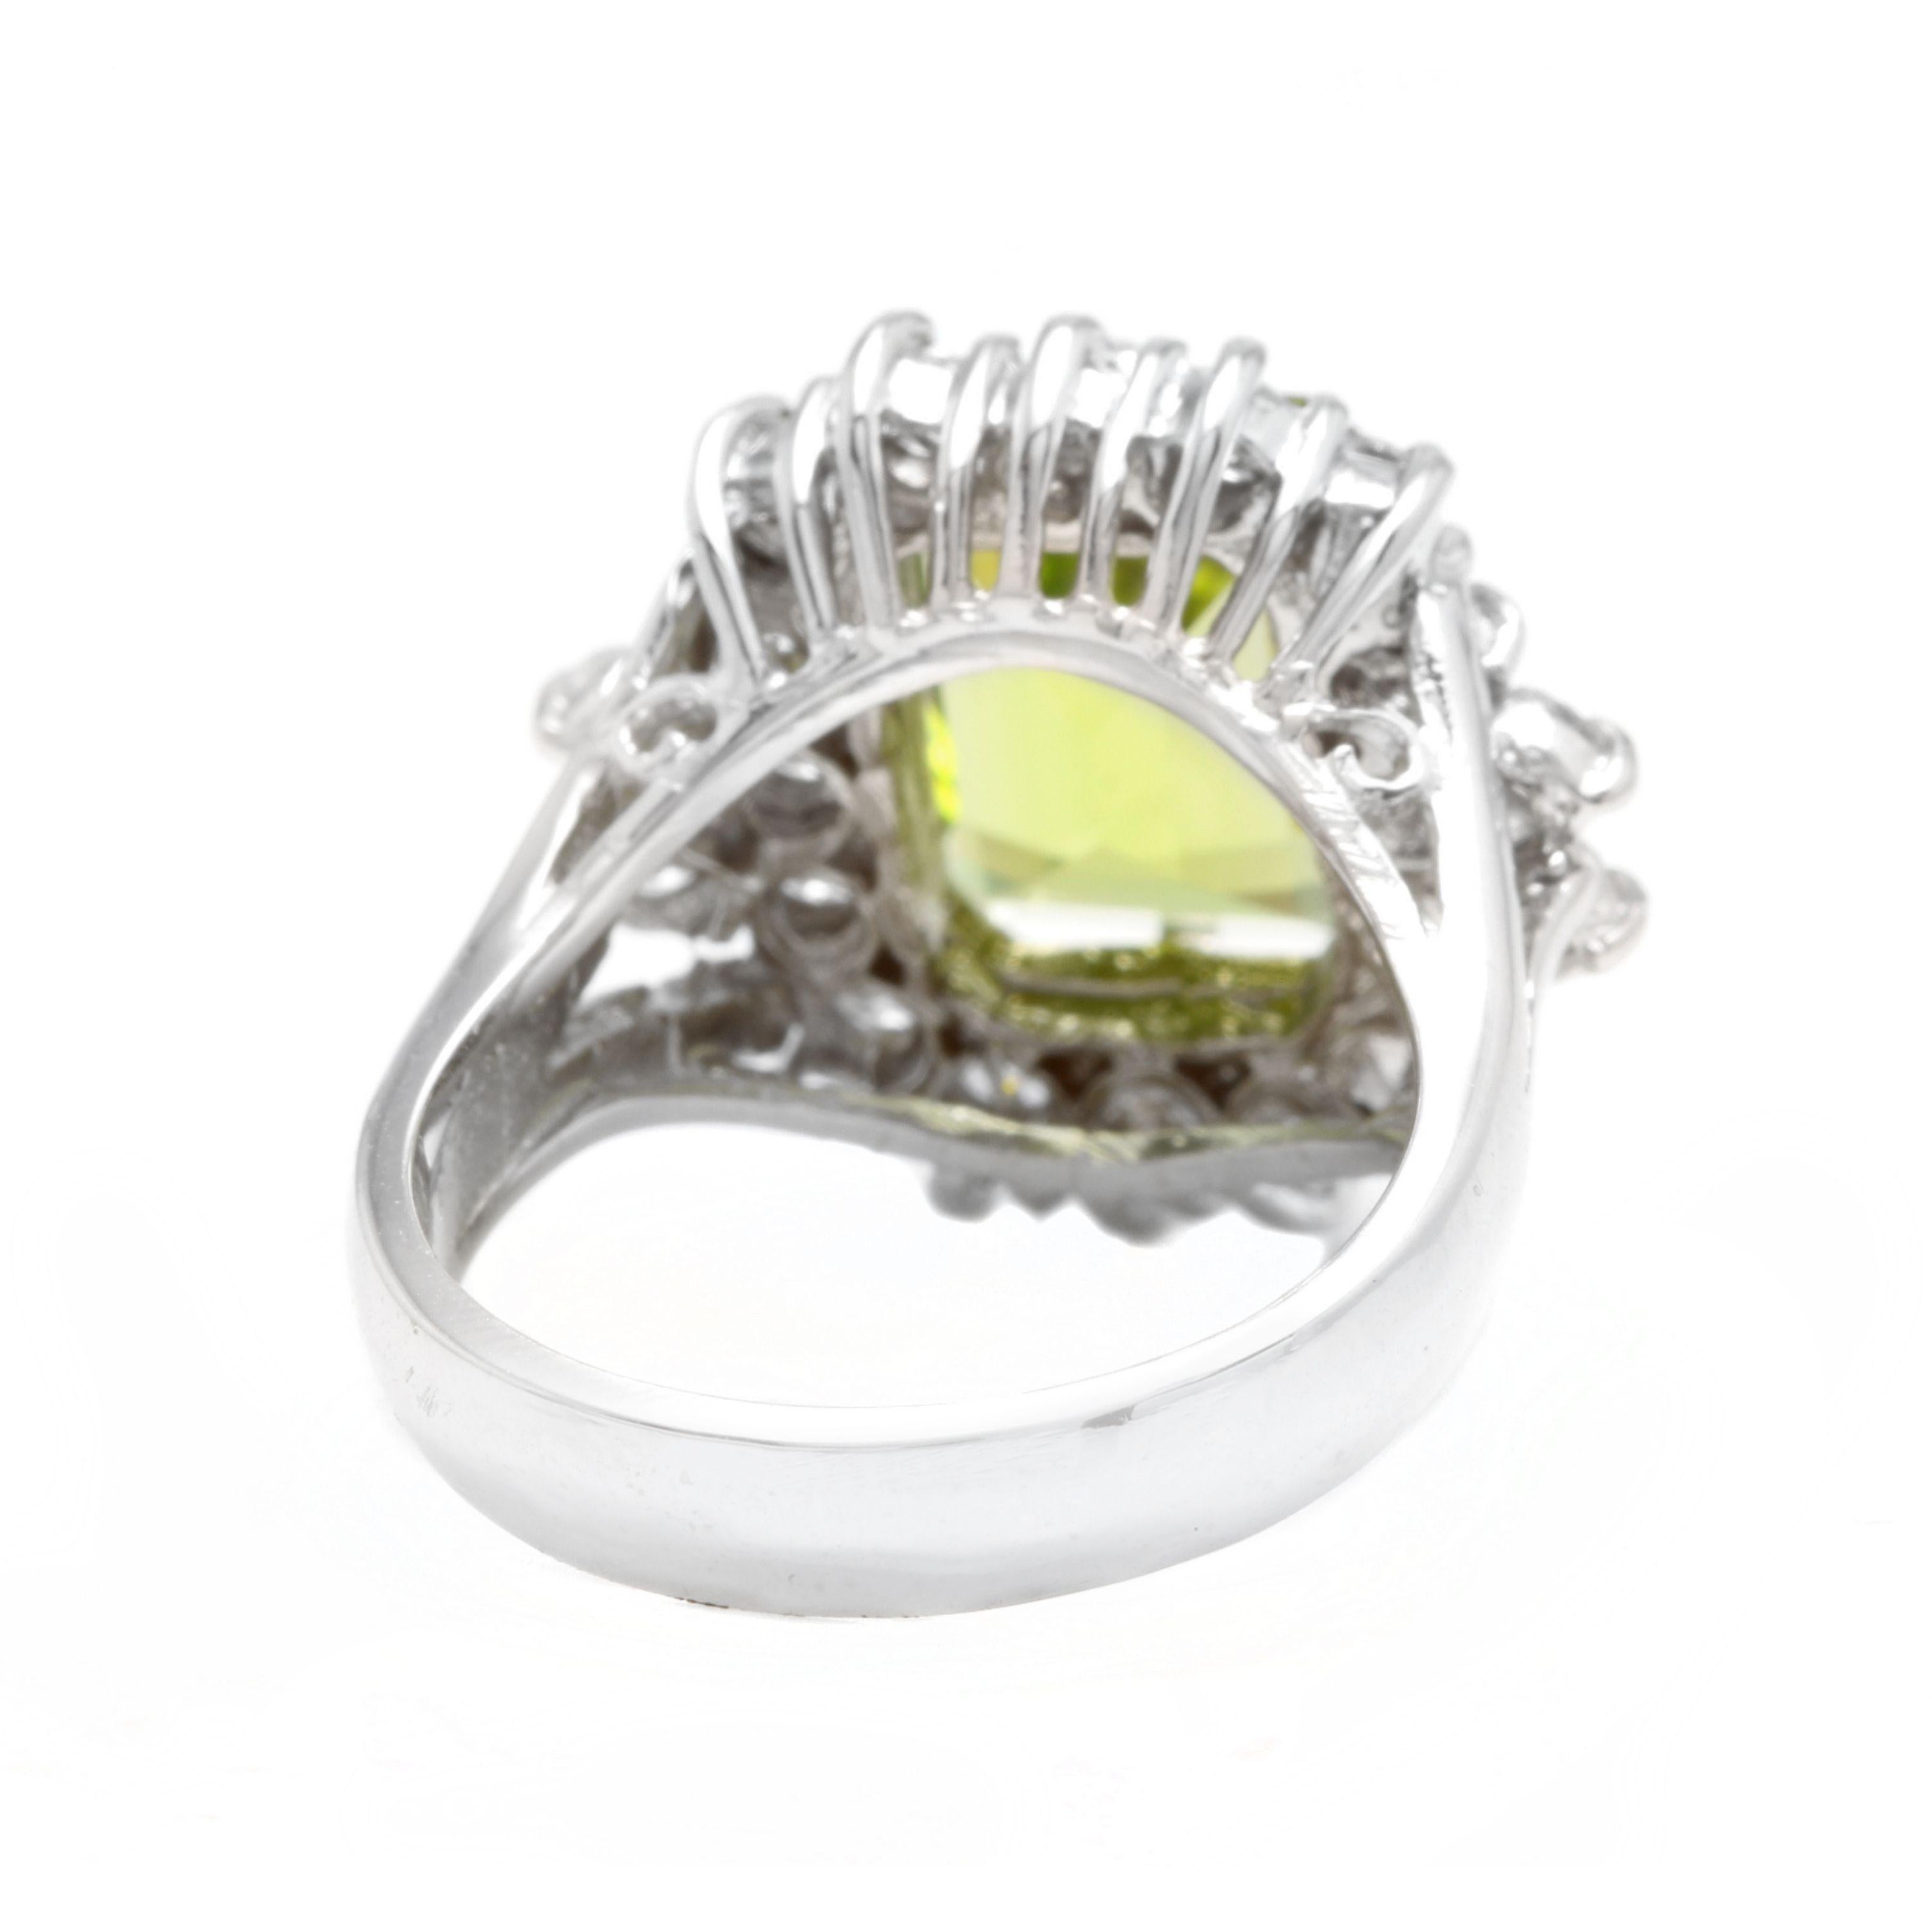 Mixed Cut 6.20 Carat Natural Peridot and Diamond 14 Karat Solid White Gold Ring For Sale